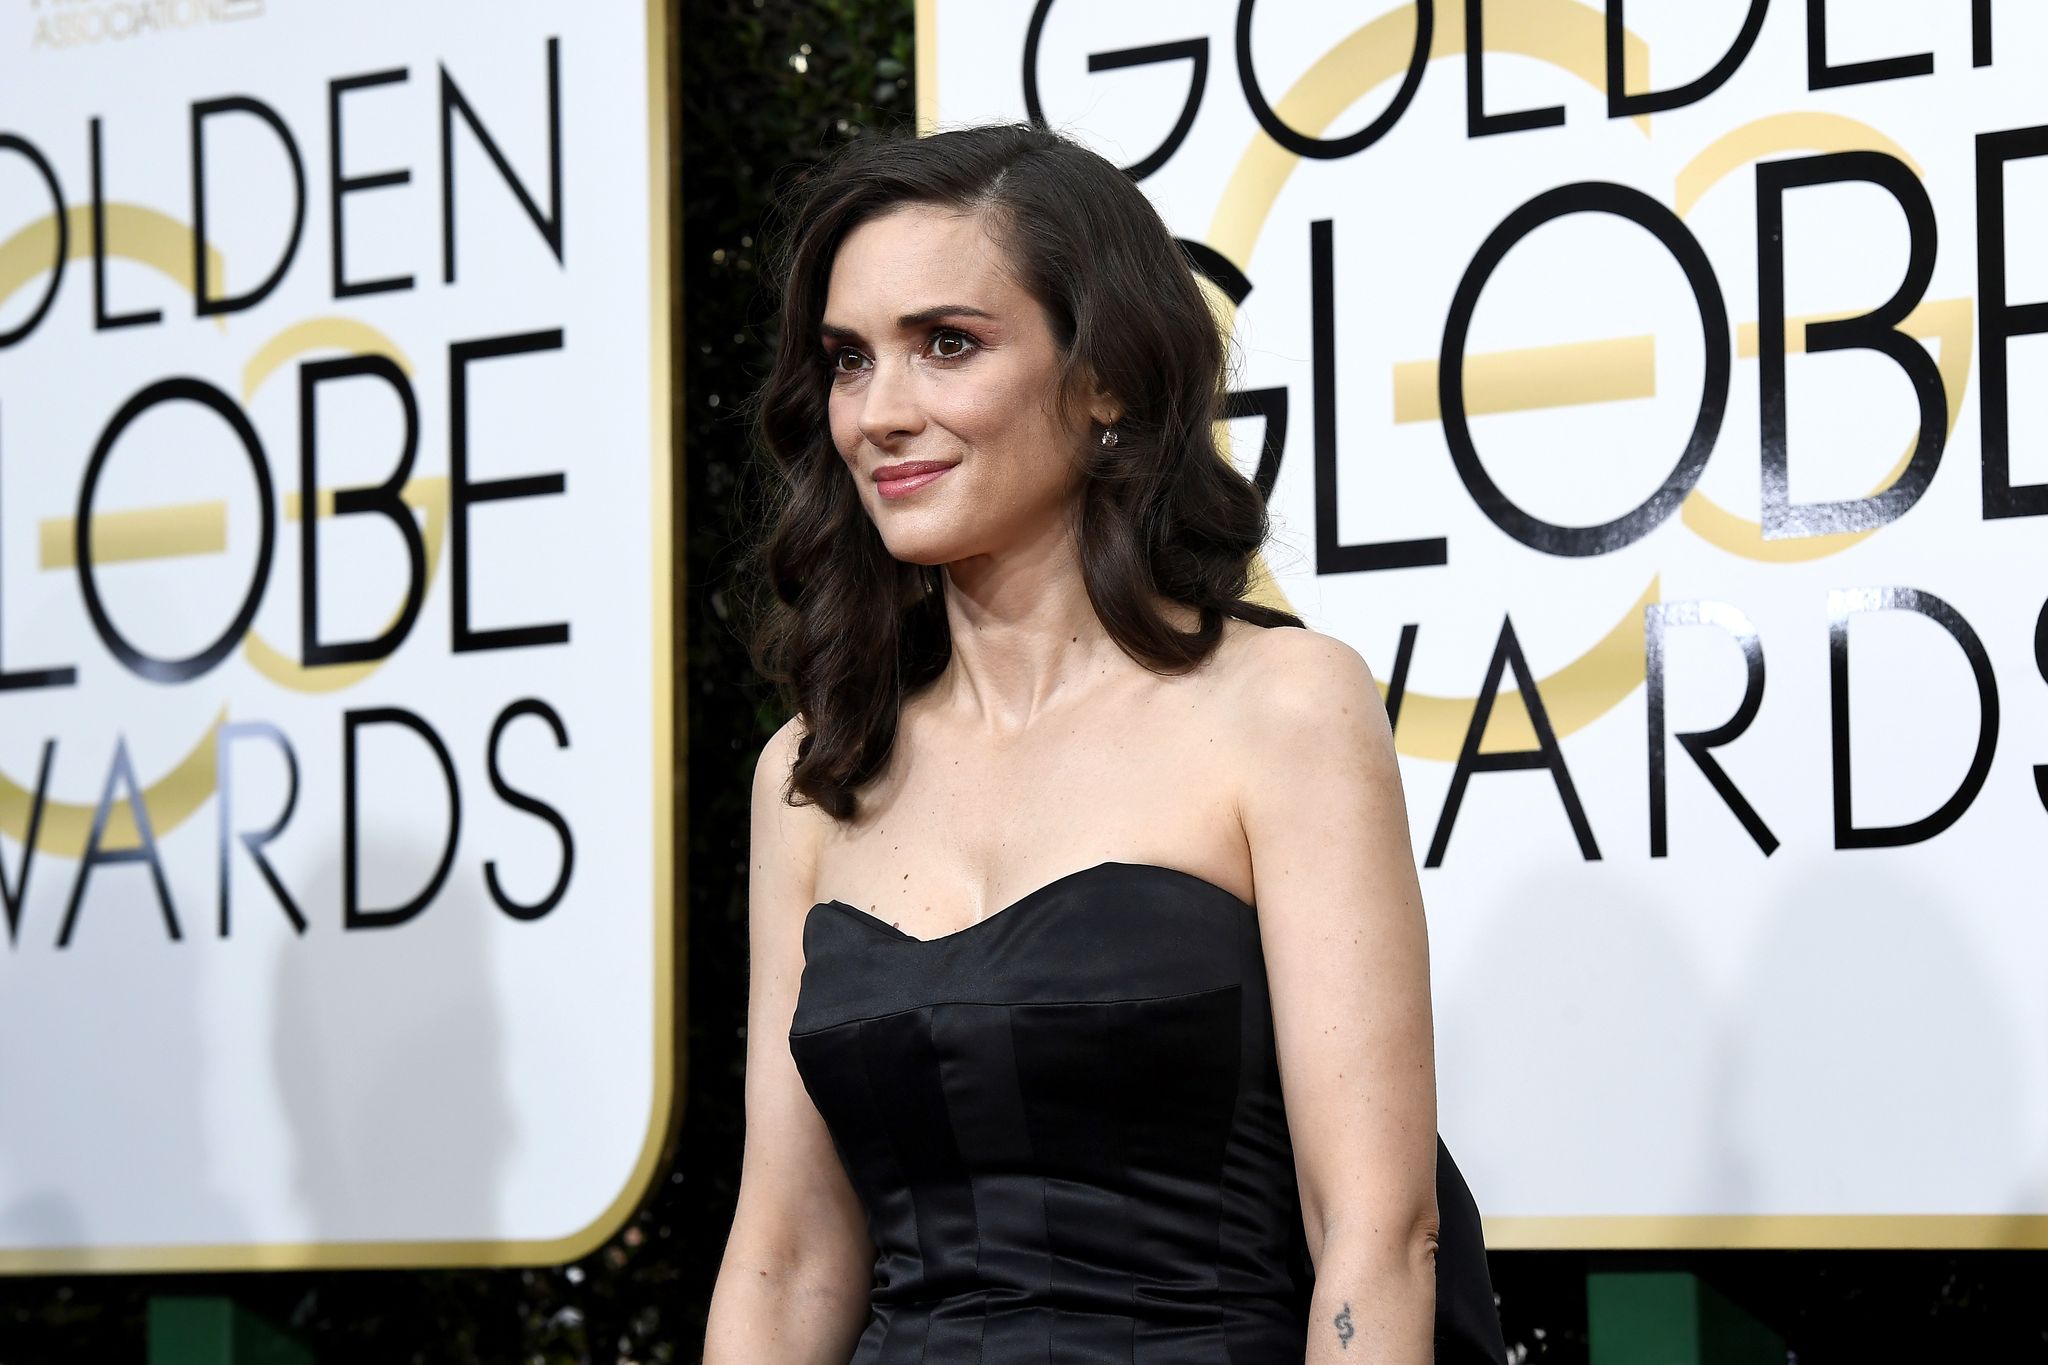 Winona Ryder at the 74th Annual Golden Globe Awards in Hollywood in 2017 | Source: Getty Images